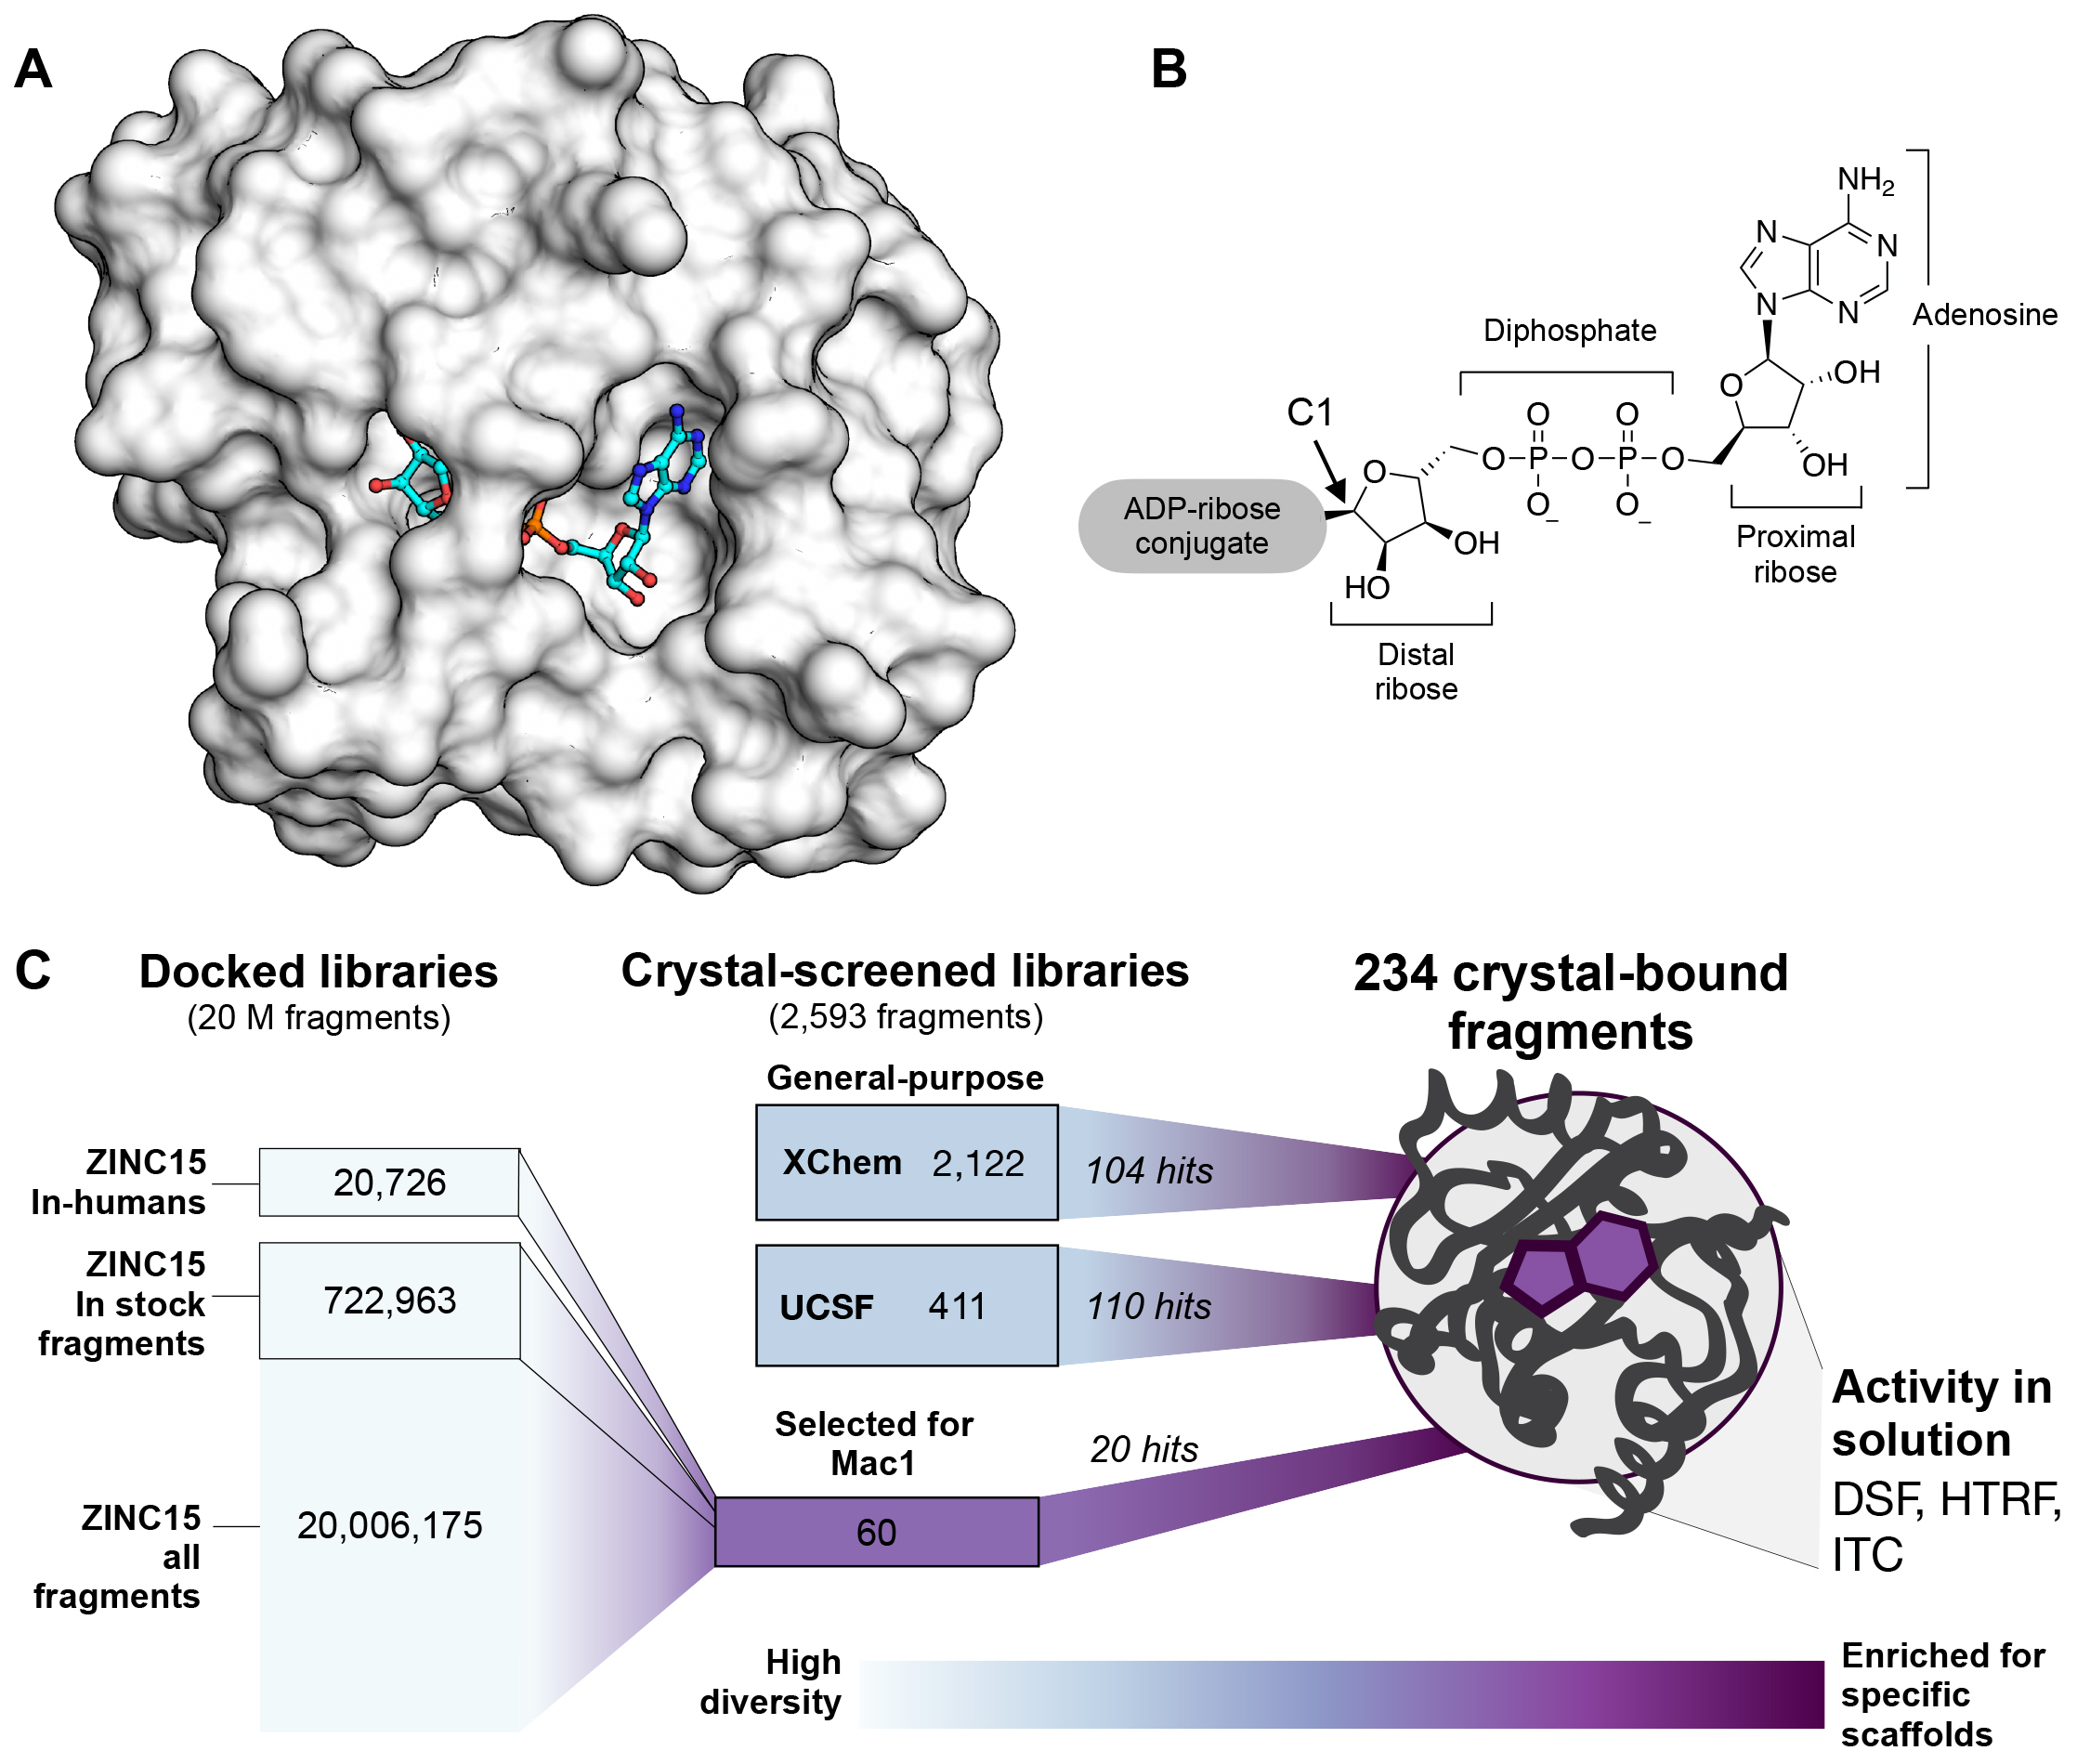 Overview of the fragment discovery approach for SARS-CoV-2 Nsp3 Mac1 presented in this study. (A) Surface representation of Nsp3 Mac1 with ADPr bound (cyan) in a deep and open binding cleft. (B) Nsp3 Mac1 has (ADP-ribosyl)hydrolase activity, which removes ADP-ribosylation modifications attached to host and pathogen targets. ADPr is conjugated through C1 of the distal ribose. (C) Summary of the fragment discovery campaign presented in this work. Three fragment libraries were screened by crystallography: two general-purpose [XChem and University of California San Francisco (UCSF)] and a third bespoke library of 60 compounds, curated for Mac1 by molecular docking of more than 20 million fragments. Crystallographic studies identified 214 unique fragments binding to Mac1, while the molecular docking effort yielded in 20 crystallographically confirmed hits. Several crystallographic and docking fragments were validated by isothermal titration calorimetry (ITC), differential scanning fluorimetry (DSF), and a HTRF-based ADPr-peptide displac 